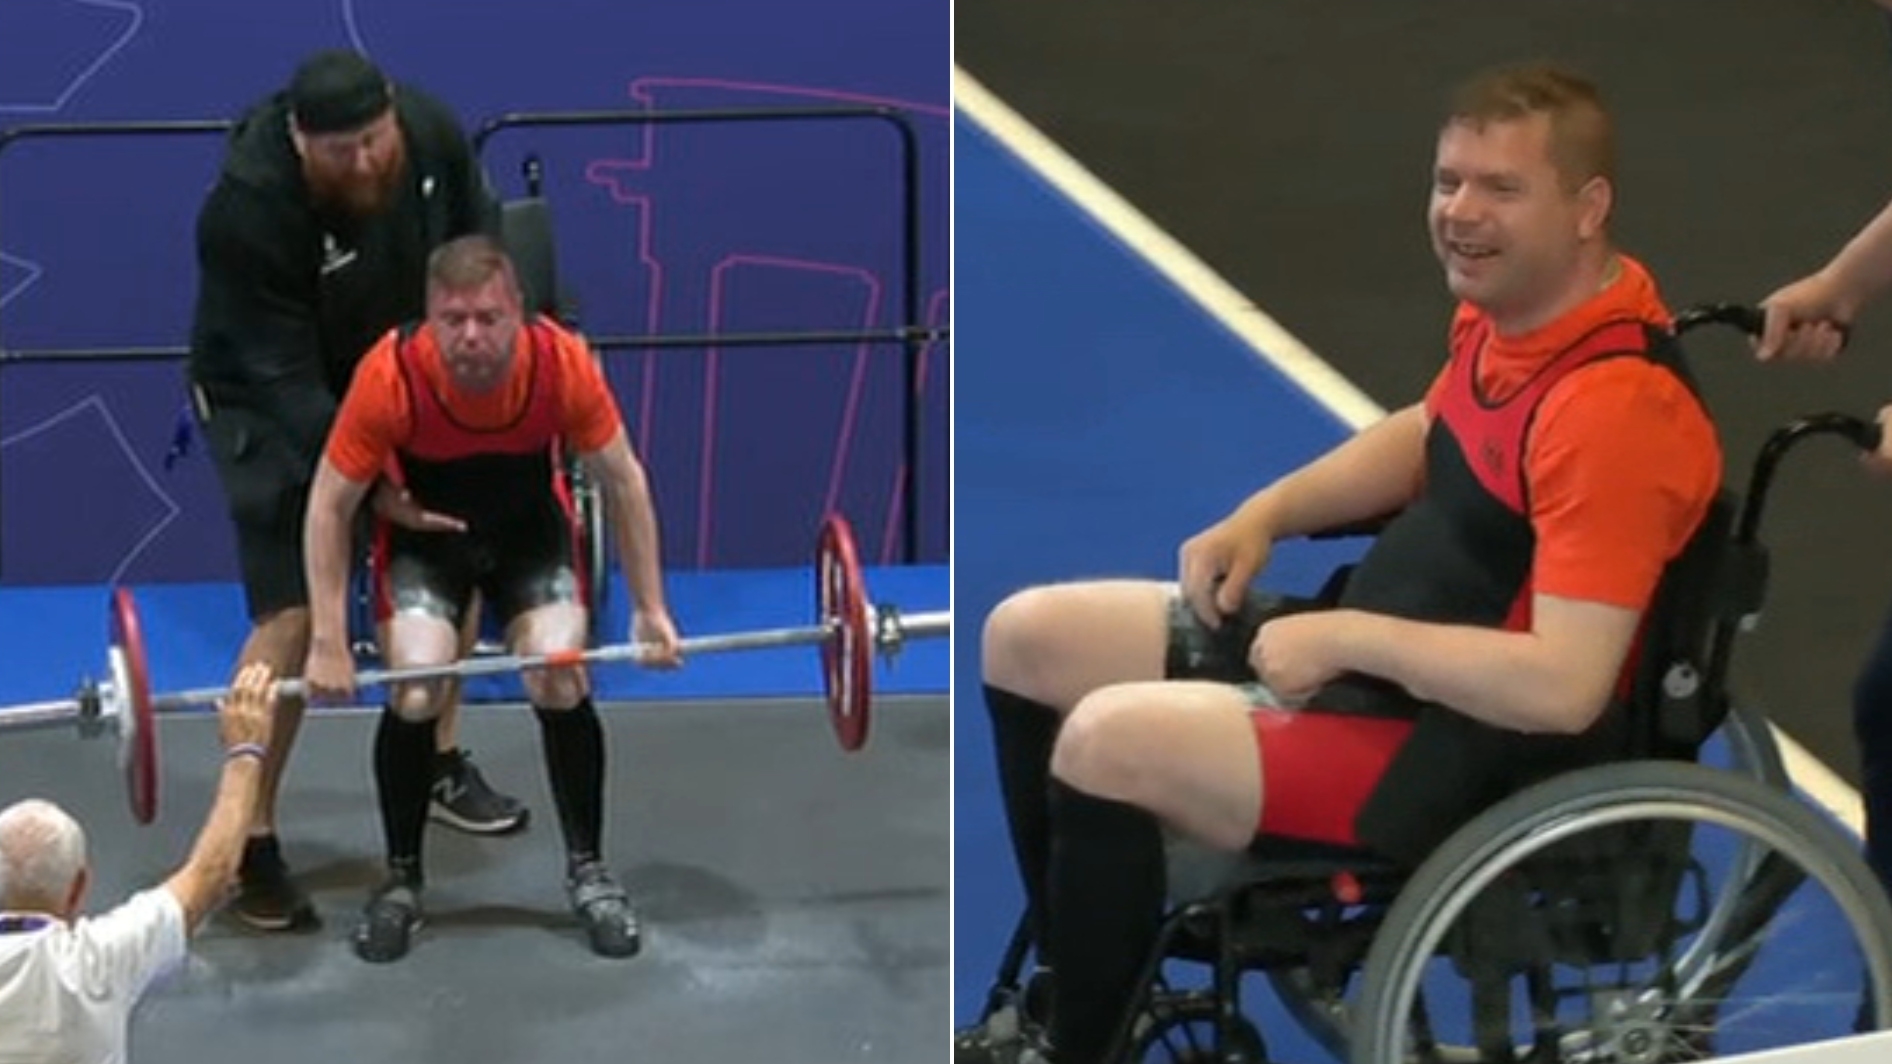 Olafsson forgoes his wheelchair in weightlifting heroics - Stream the Video 